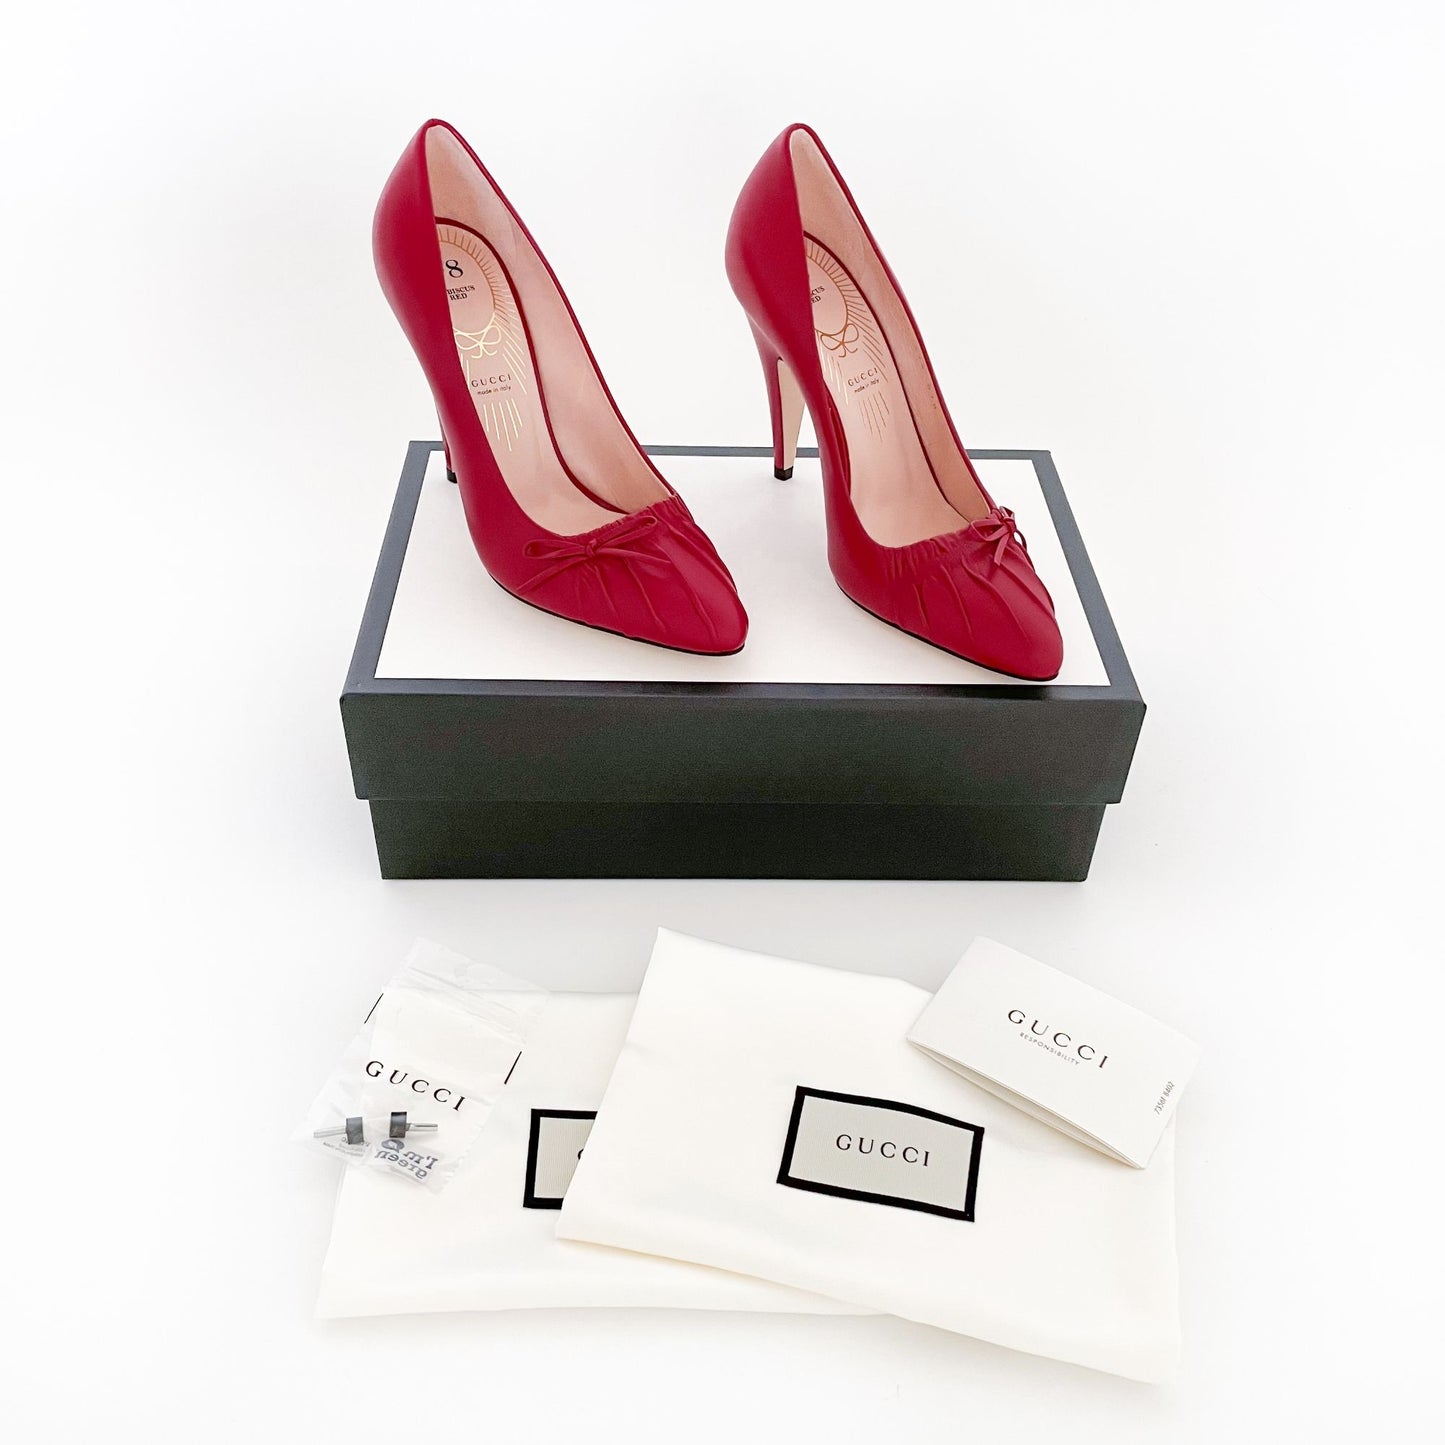 Gucci Kaiko Bow Pumps in No. 8 Hibiscus Red Nappa Charlotte Size 37.5